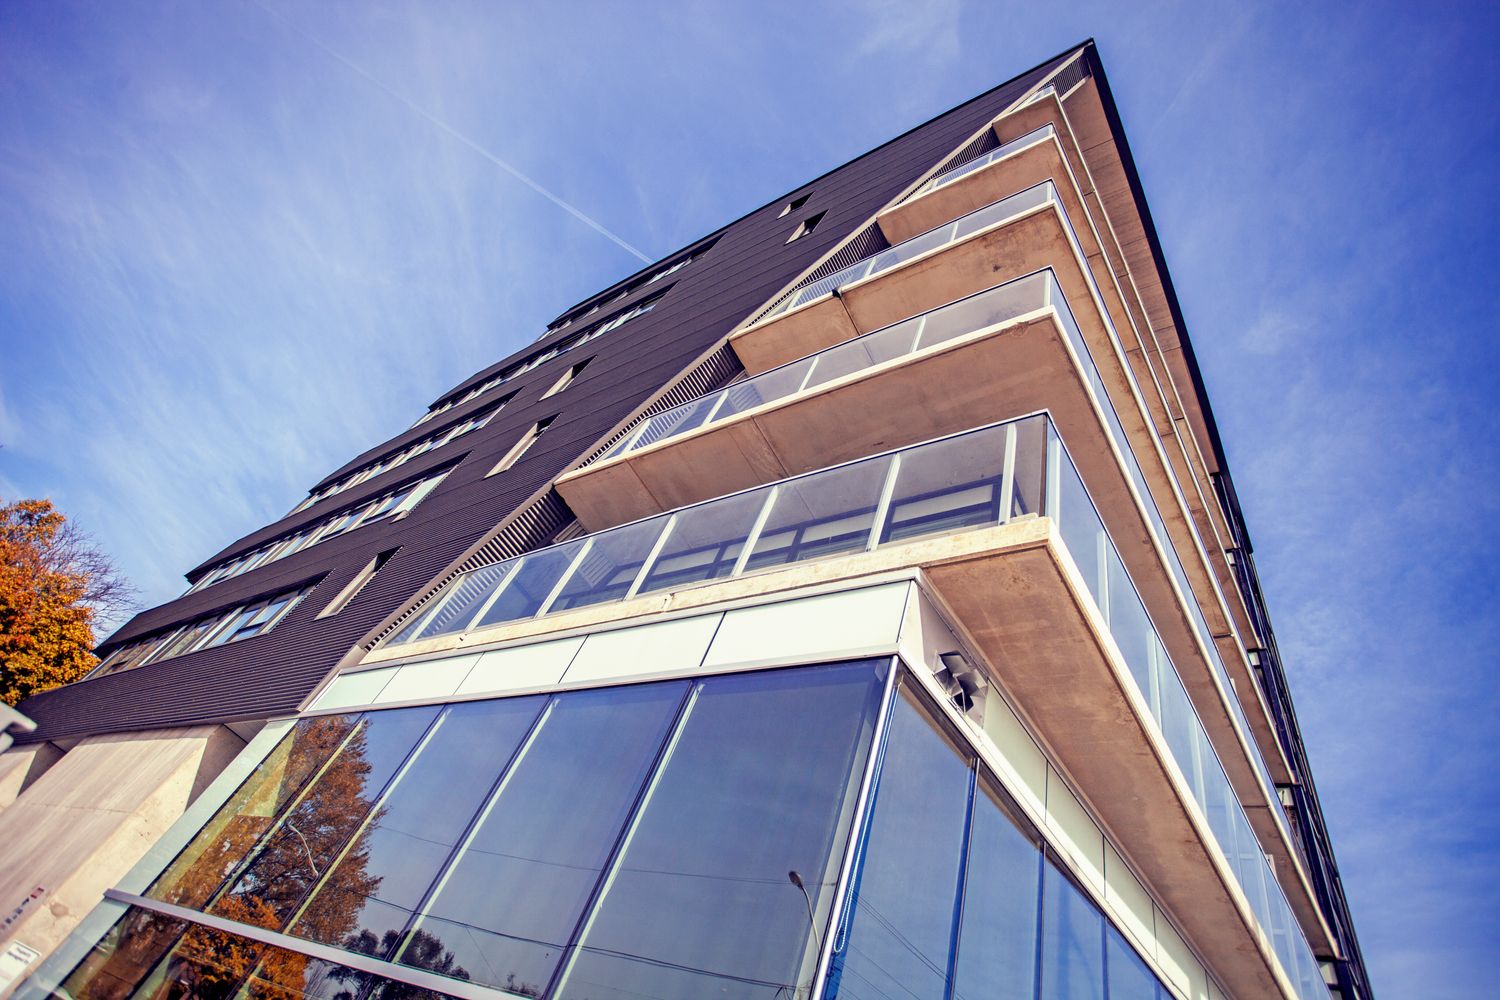 51 Lady Bank Road. The Hive Lofts is located in  Etobicoke, Toronto - image #1 of 6